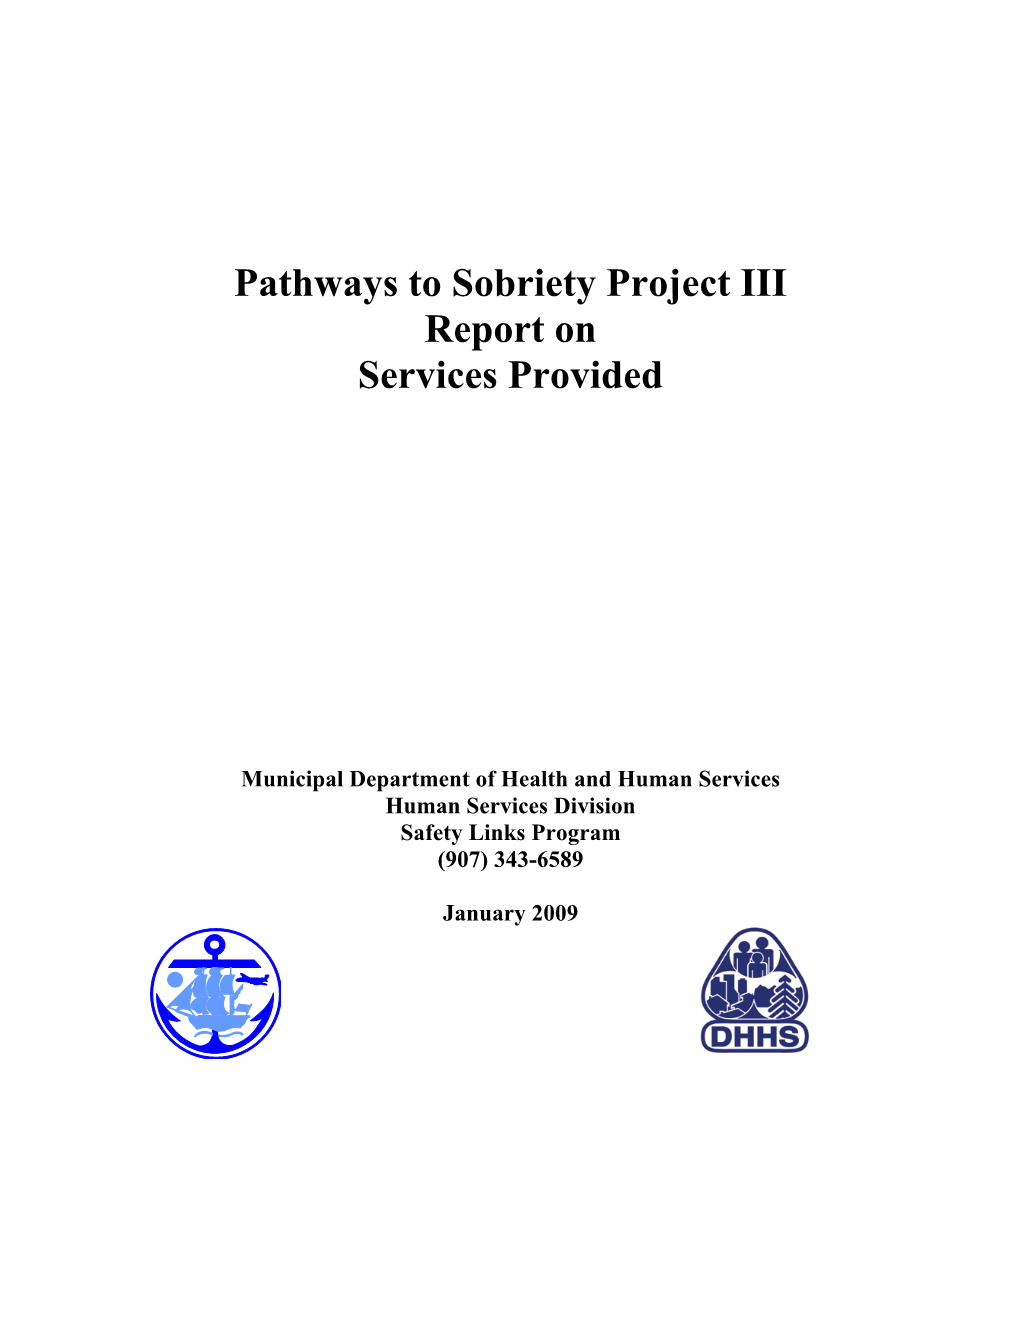 This Report Analyzes the Impacts of the Pathways to Sobriety